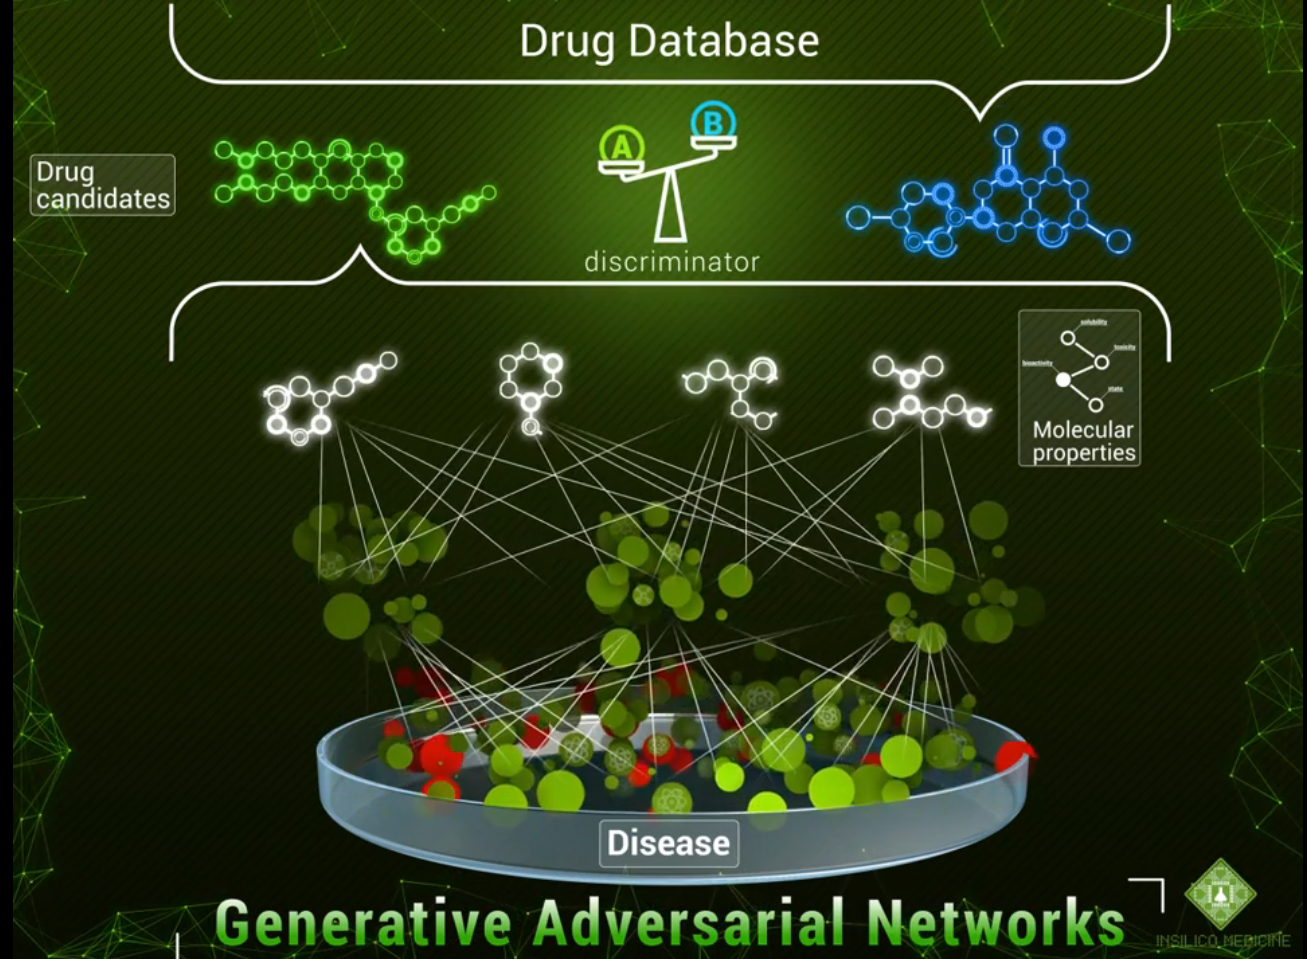 Creating Molecules From Scratch I Drug Discovery With Generative Adversarial Networks By Neuromation Neuromation Medium